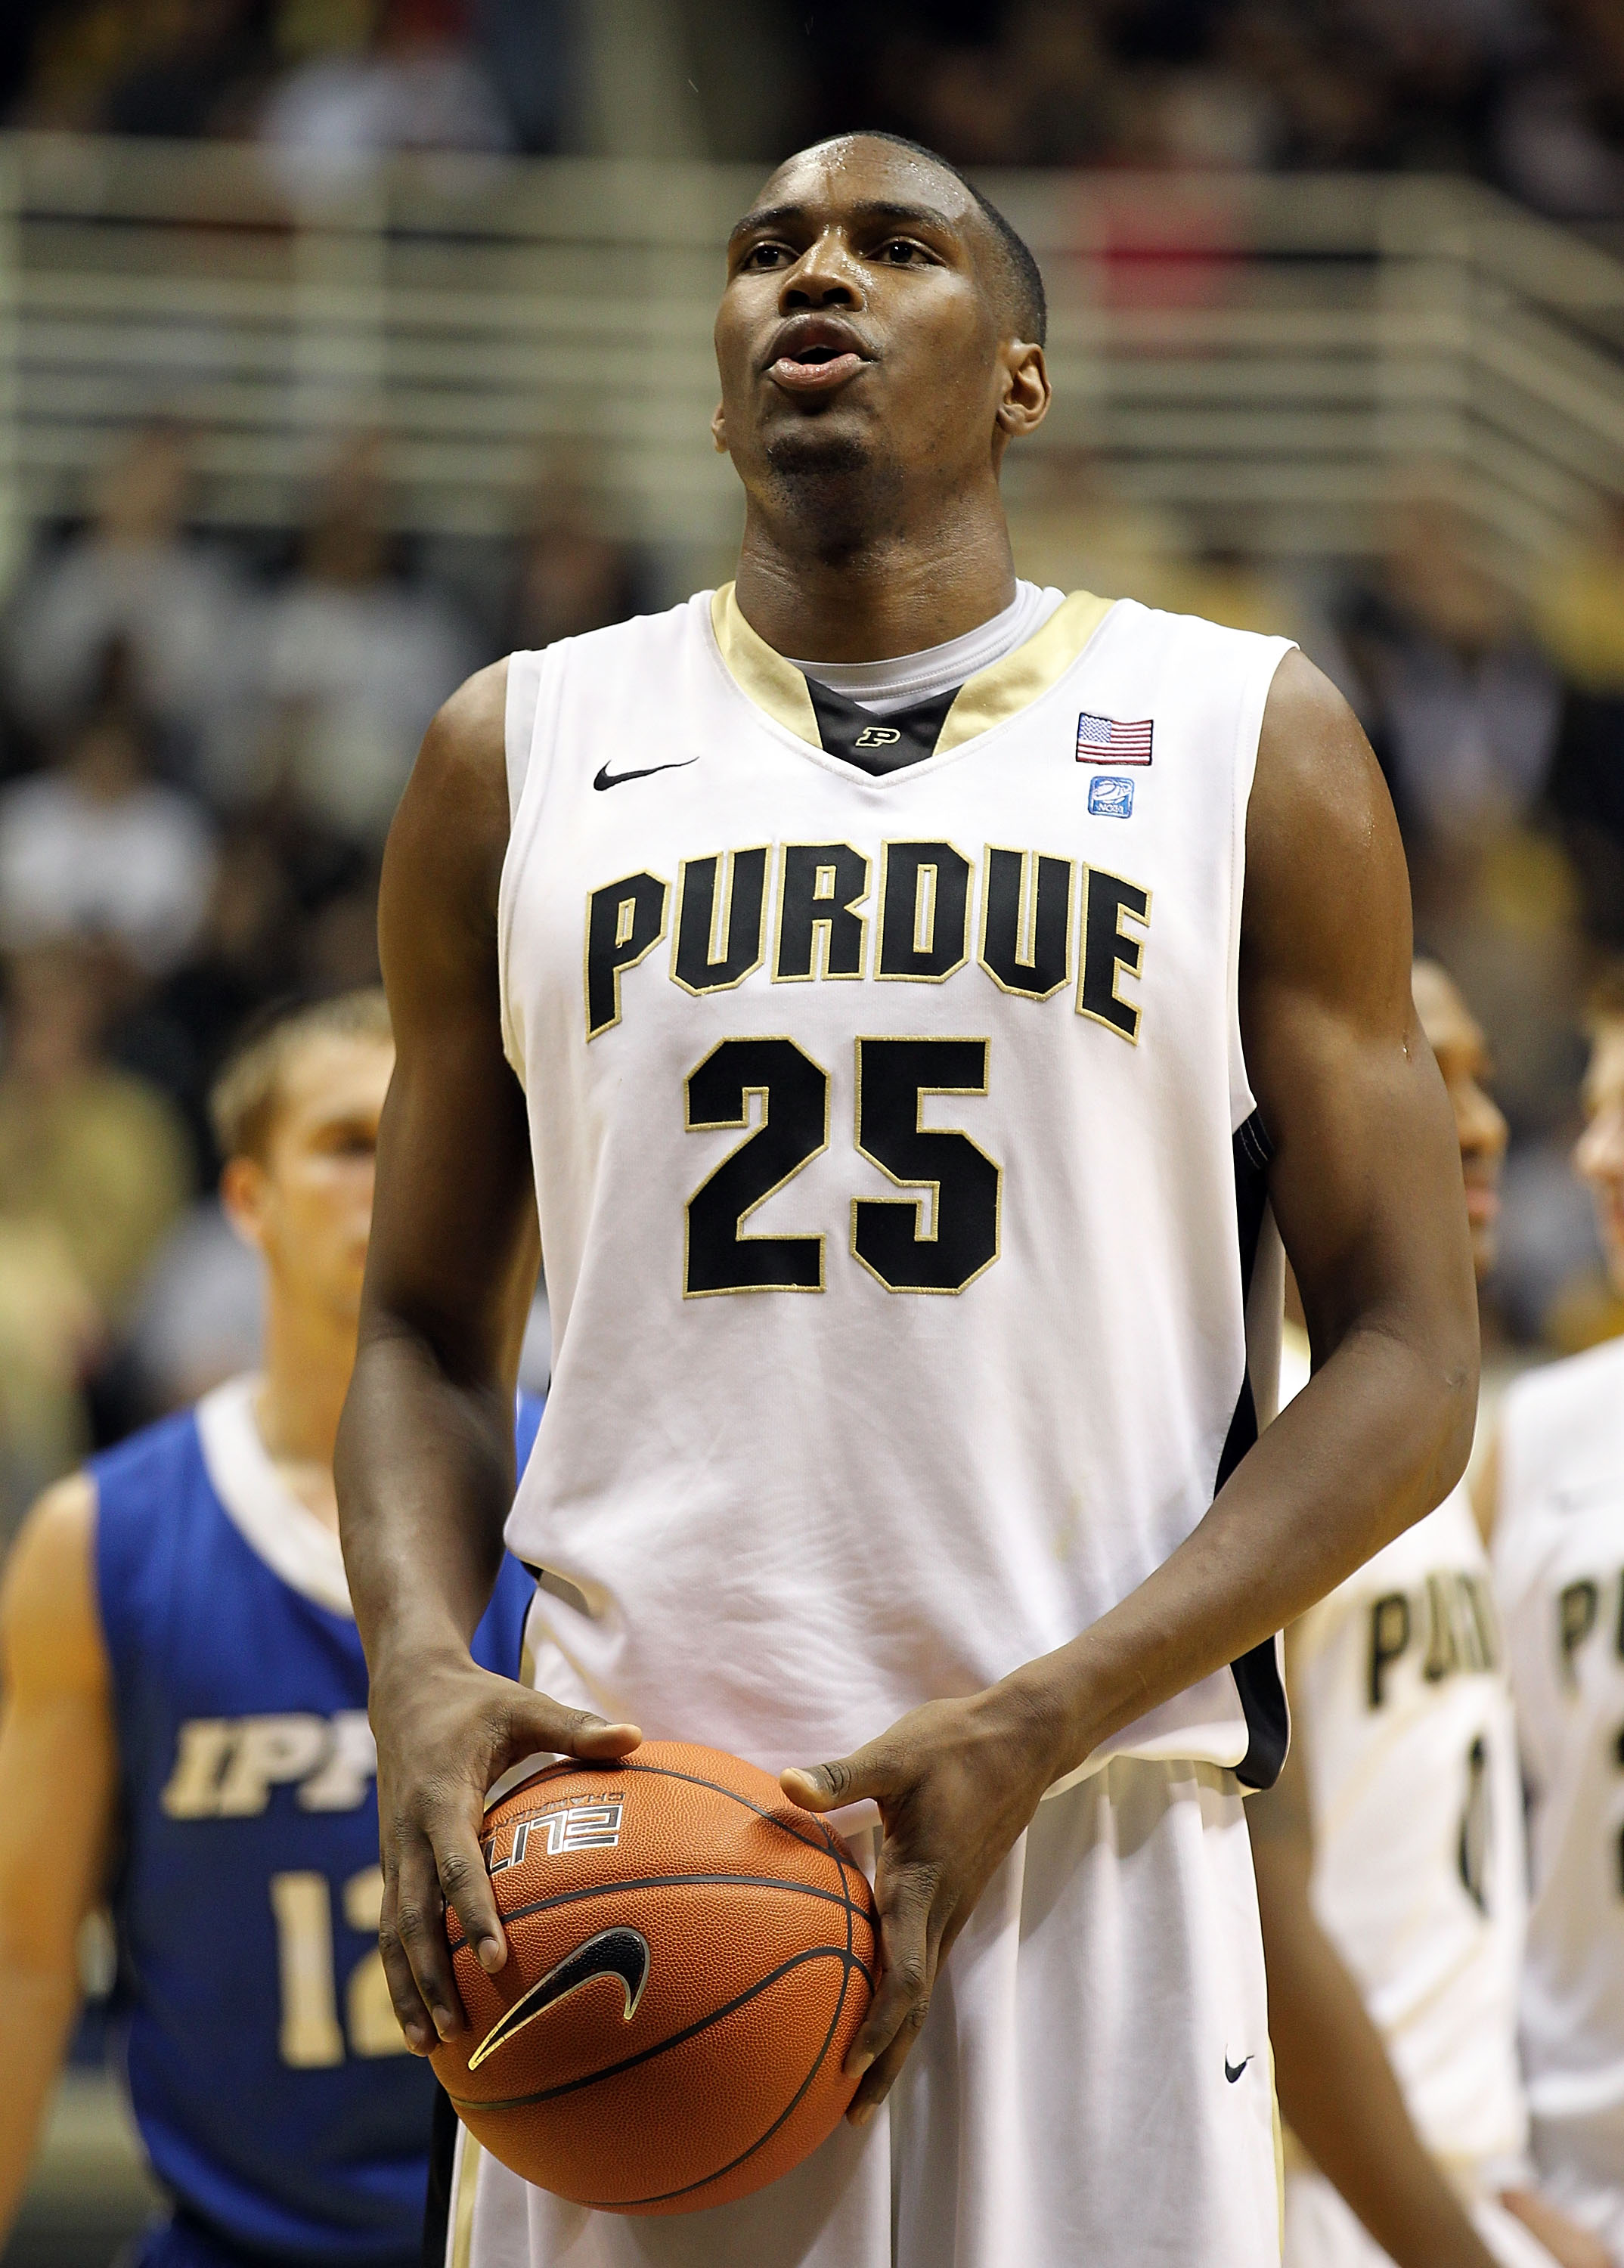 WEST LAFAYETTE, IN - DECEMBER 21:  JaJuan Johnson #25 of the Purdue Boilermakers shoots the ball during the game against the IPFW Mastodons at Mackey Arena on December 21, 2010 in West Lafayette, Indiana.  (Photo by Andy Lyons/Getty Images)